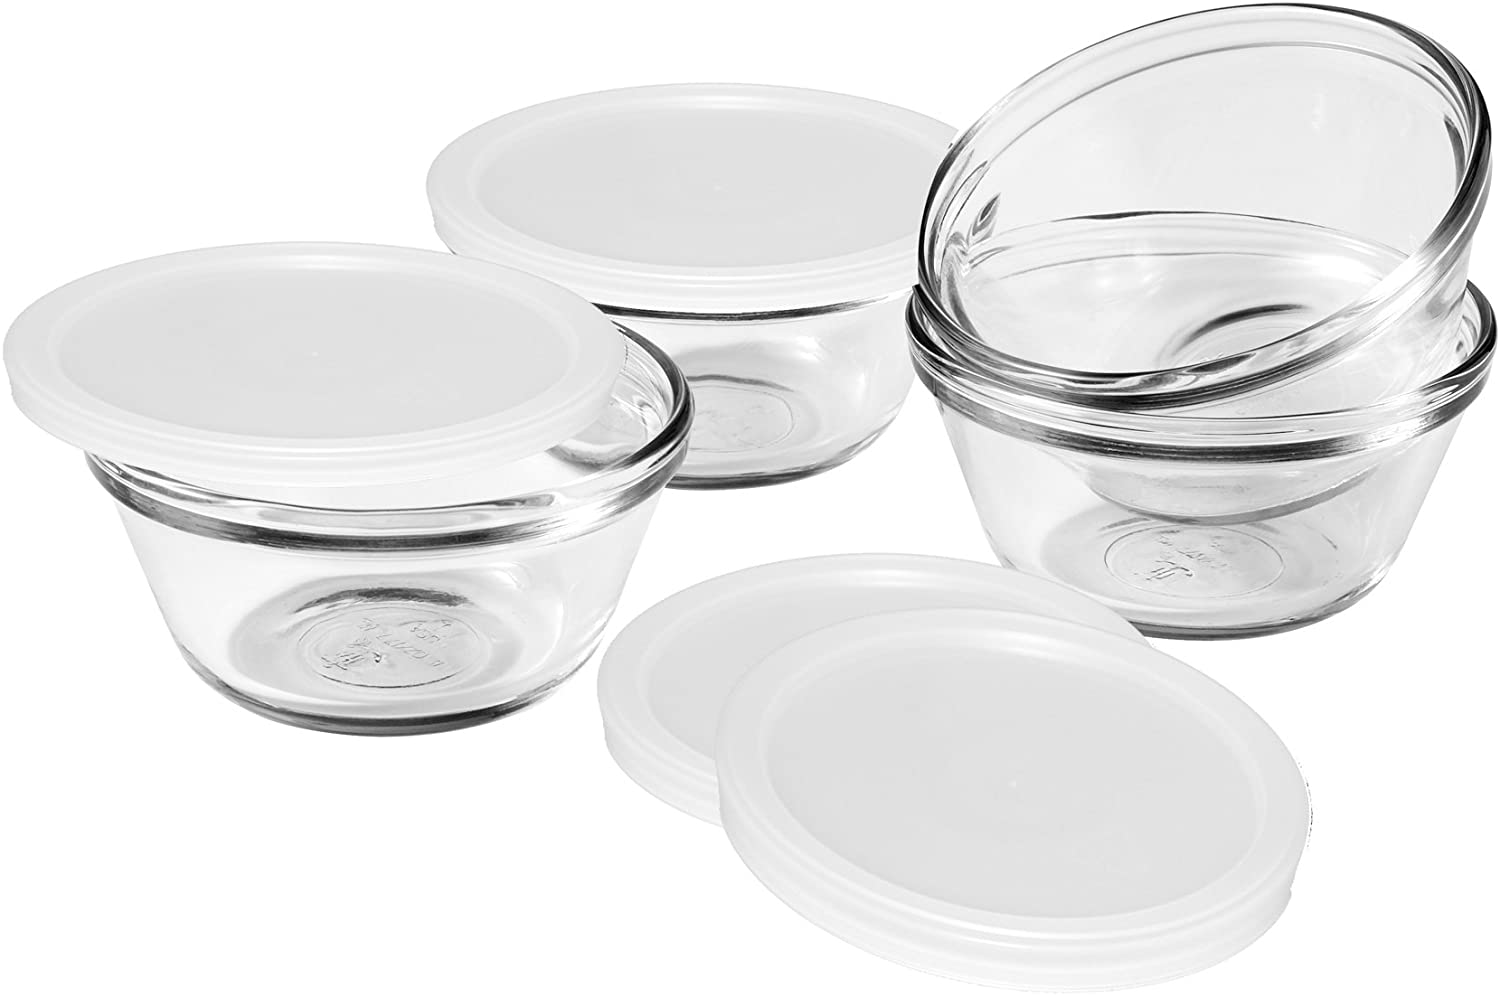 Anchor Hocking 1-Cup Round Food Storage Containers Clear glass with Blue  Plastic Lids, Set of 6 